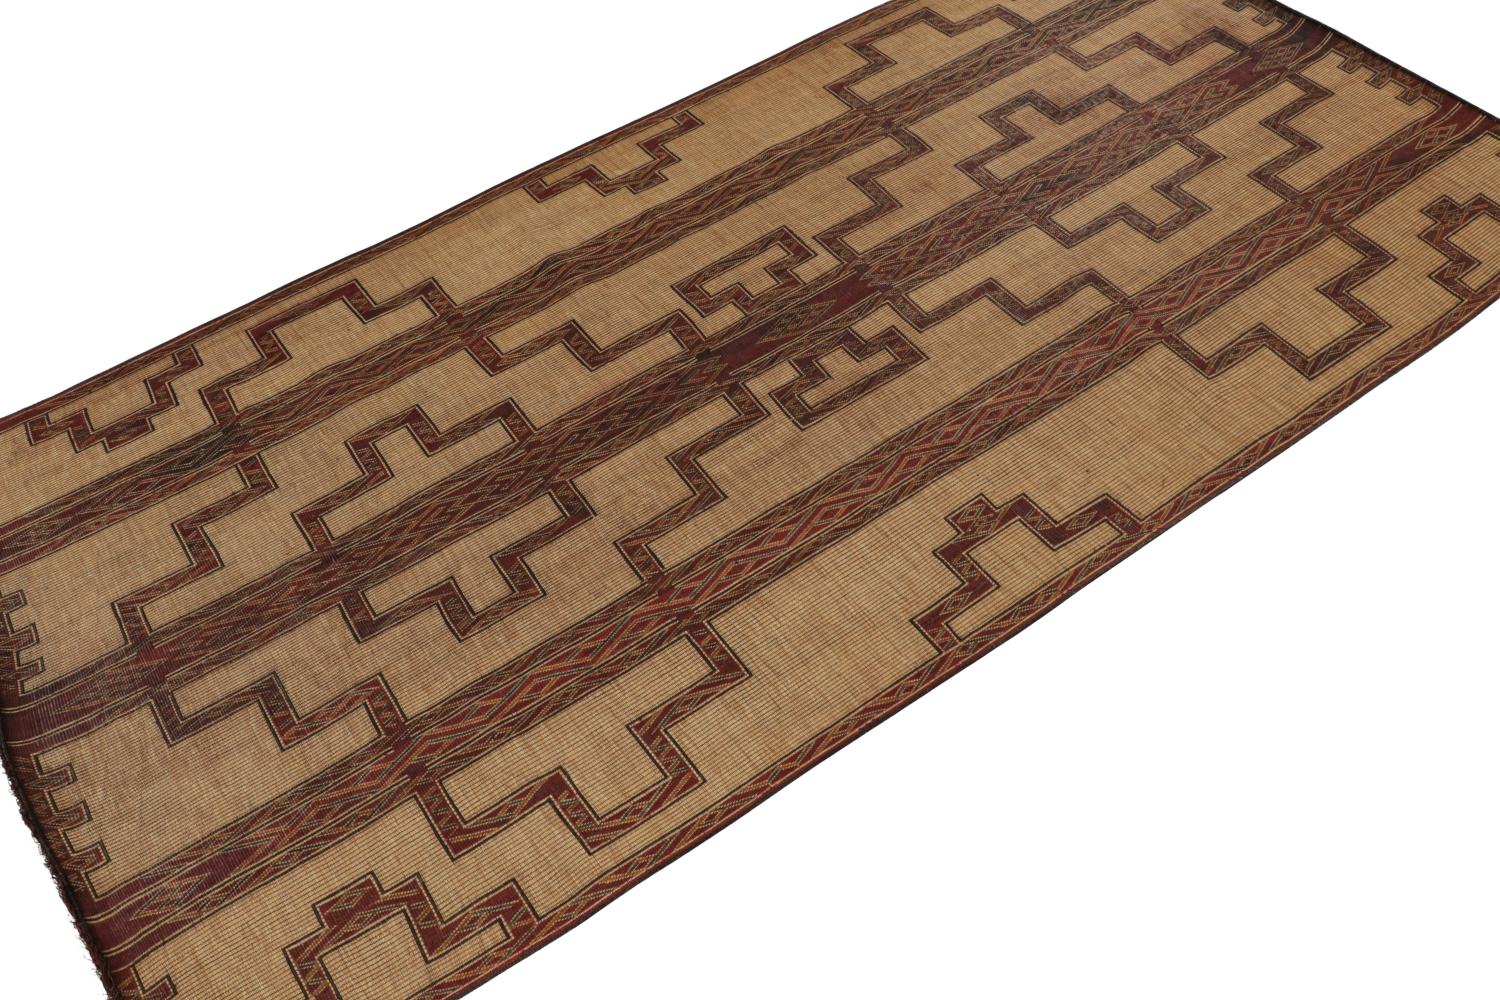 Hand-Woven Vintage Moroccan Tuareg Mat in Beige with Geometric Patterns, from Rug & Kilim For Sale